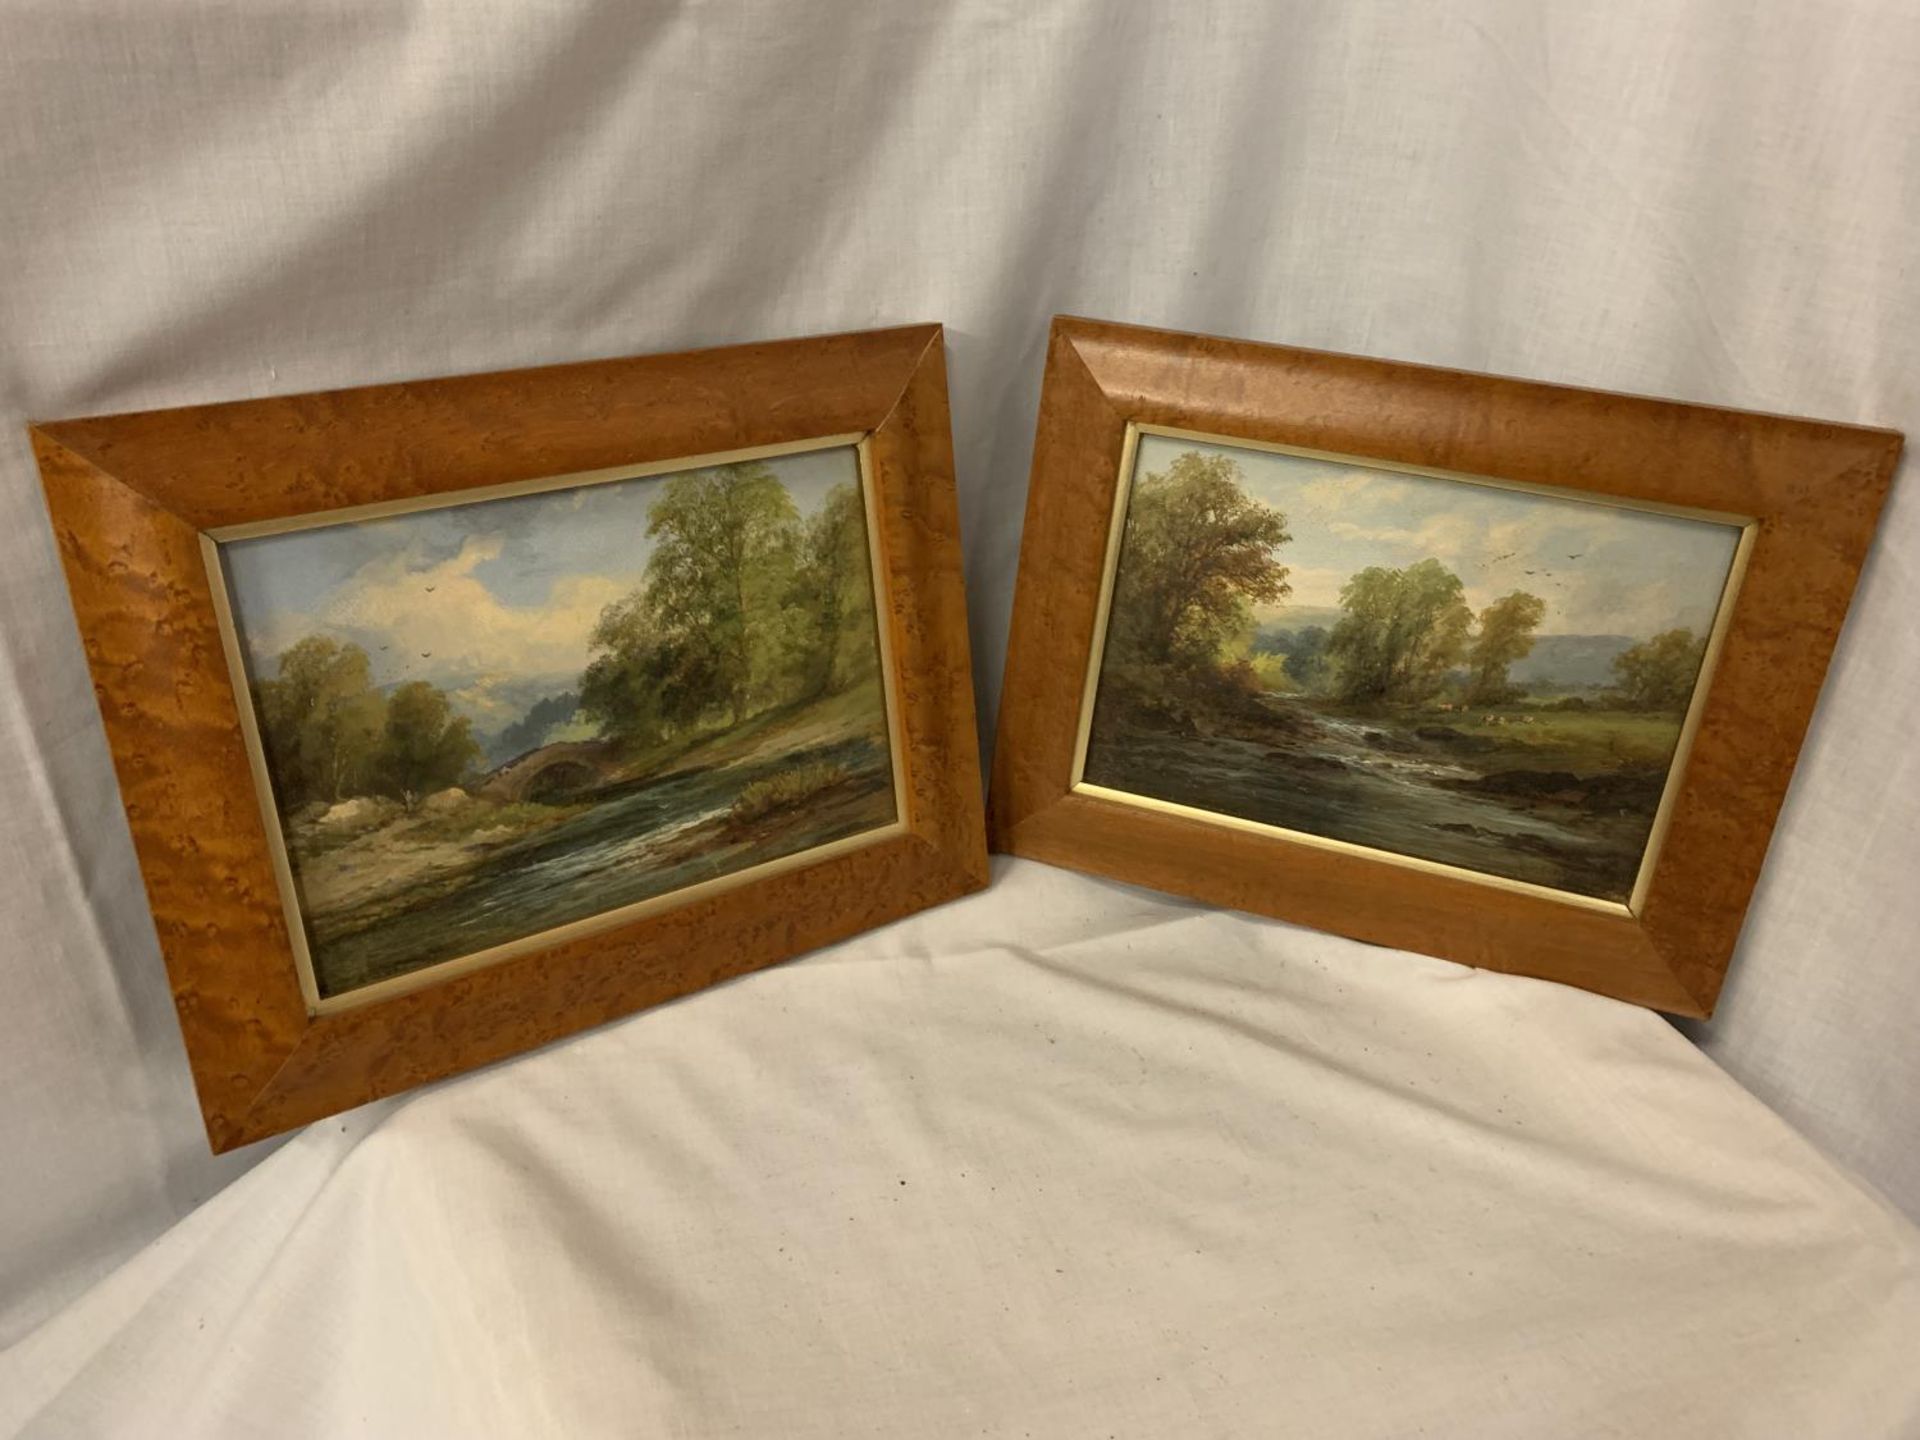 A PAIR OF FRAMED OILS ON BOARD OF LANDSCAPE SCENES, INDISTINCT SIGNATURE